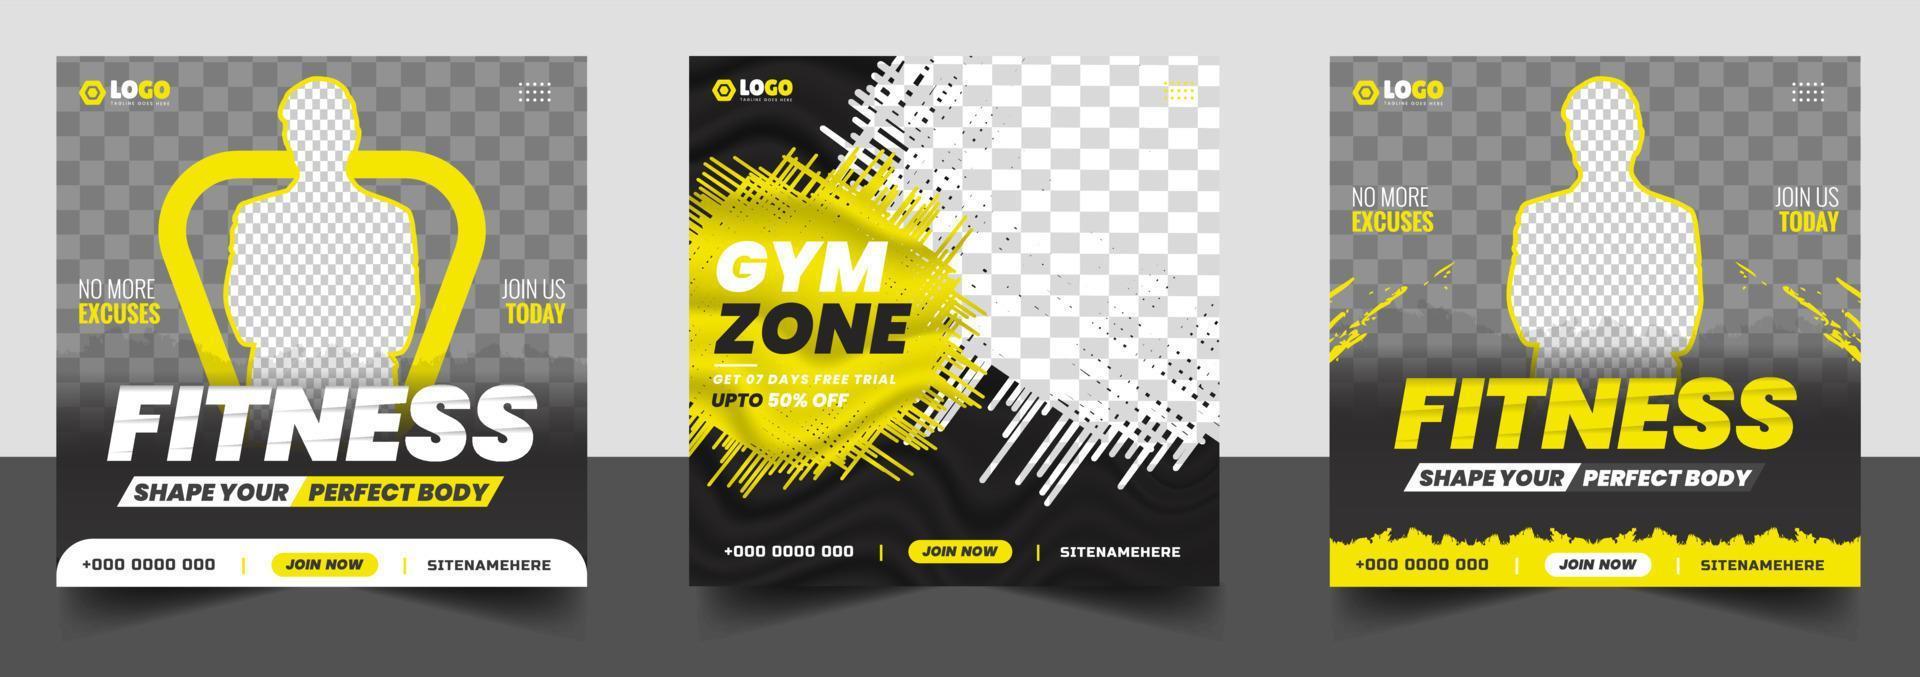 Fitness gym social media post banner template with black and yellow color, gym, Workout, fitness and Sports social media post banner, fitness gym social media post banner design. vector